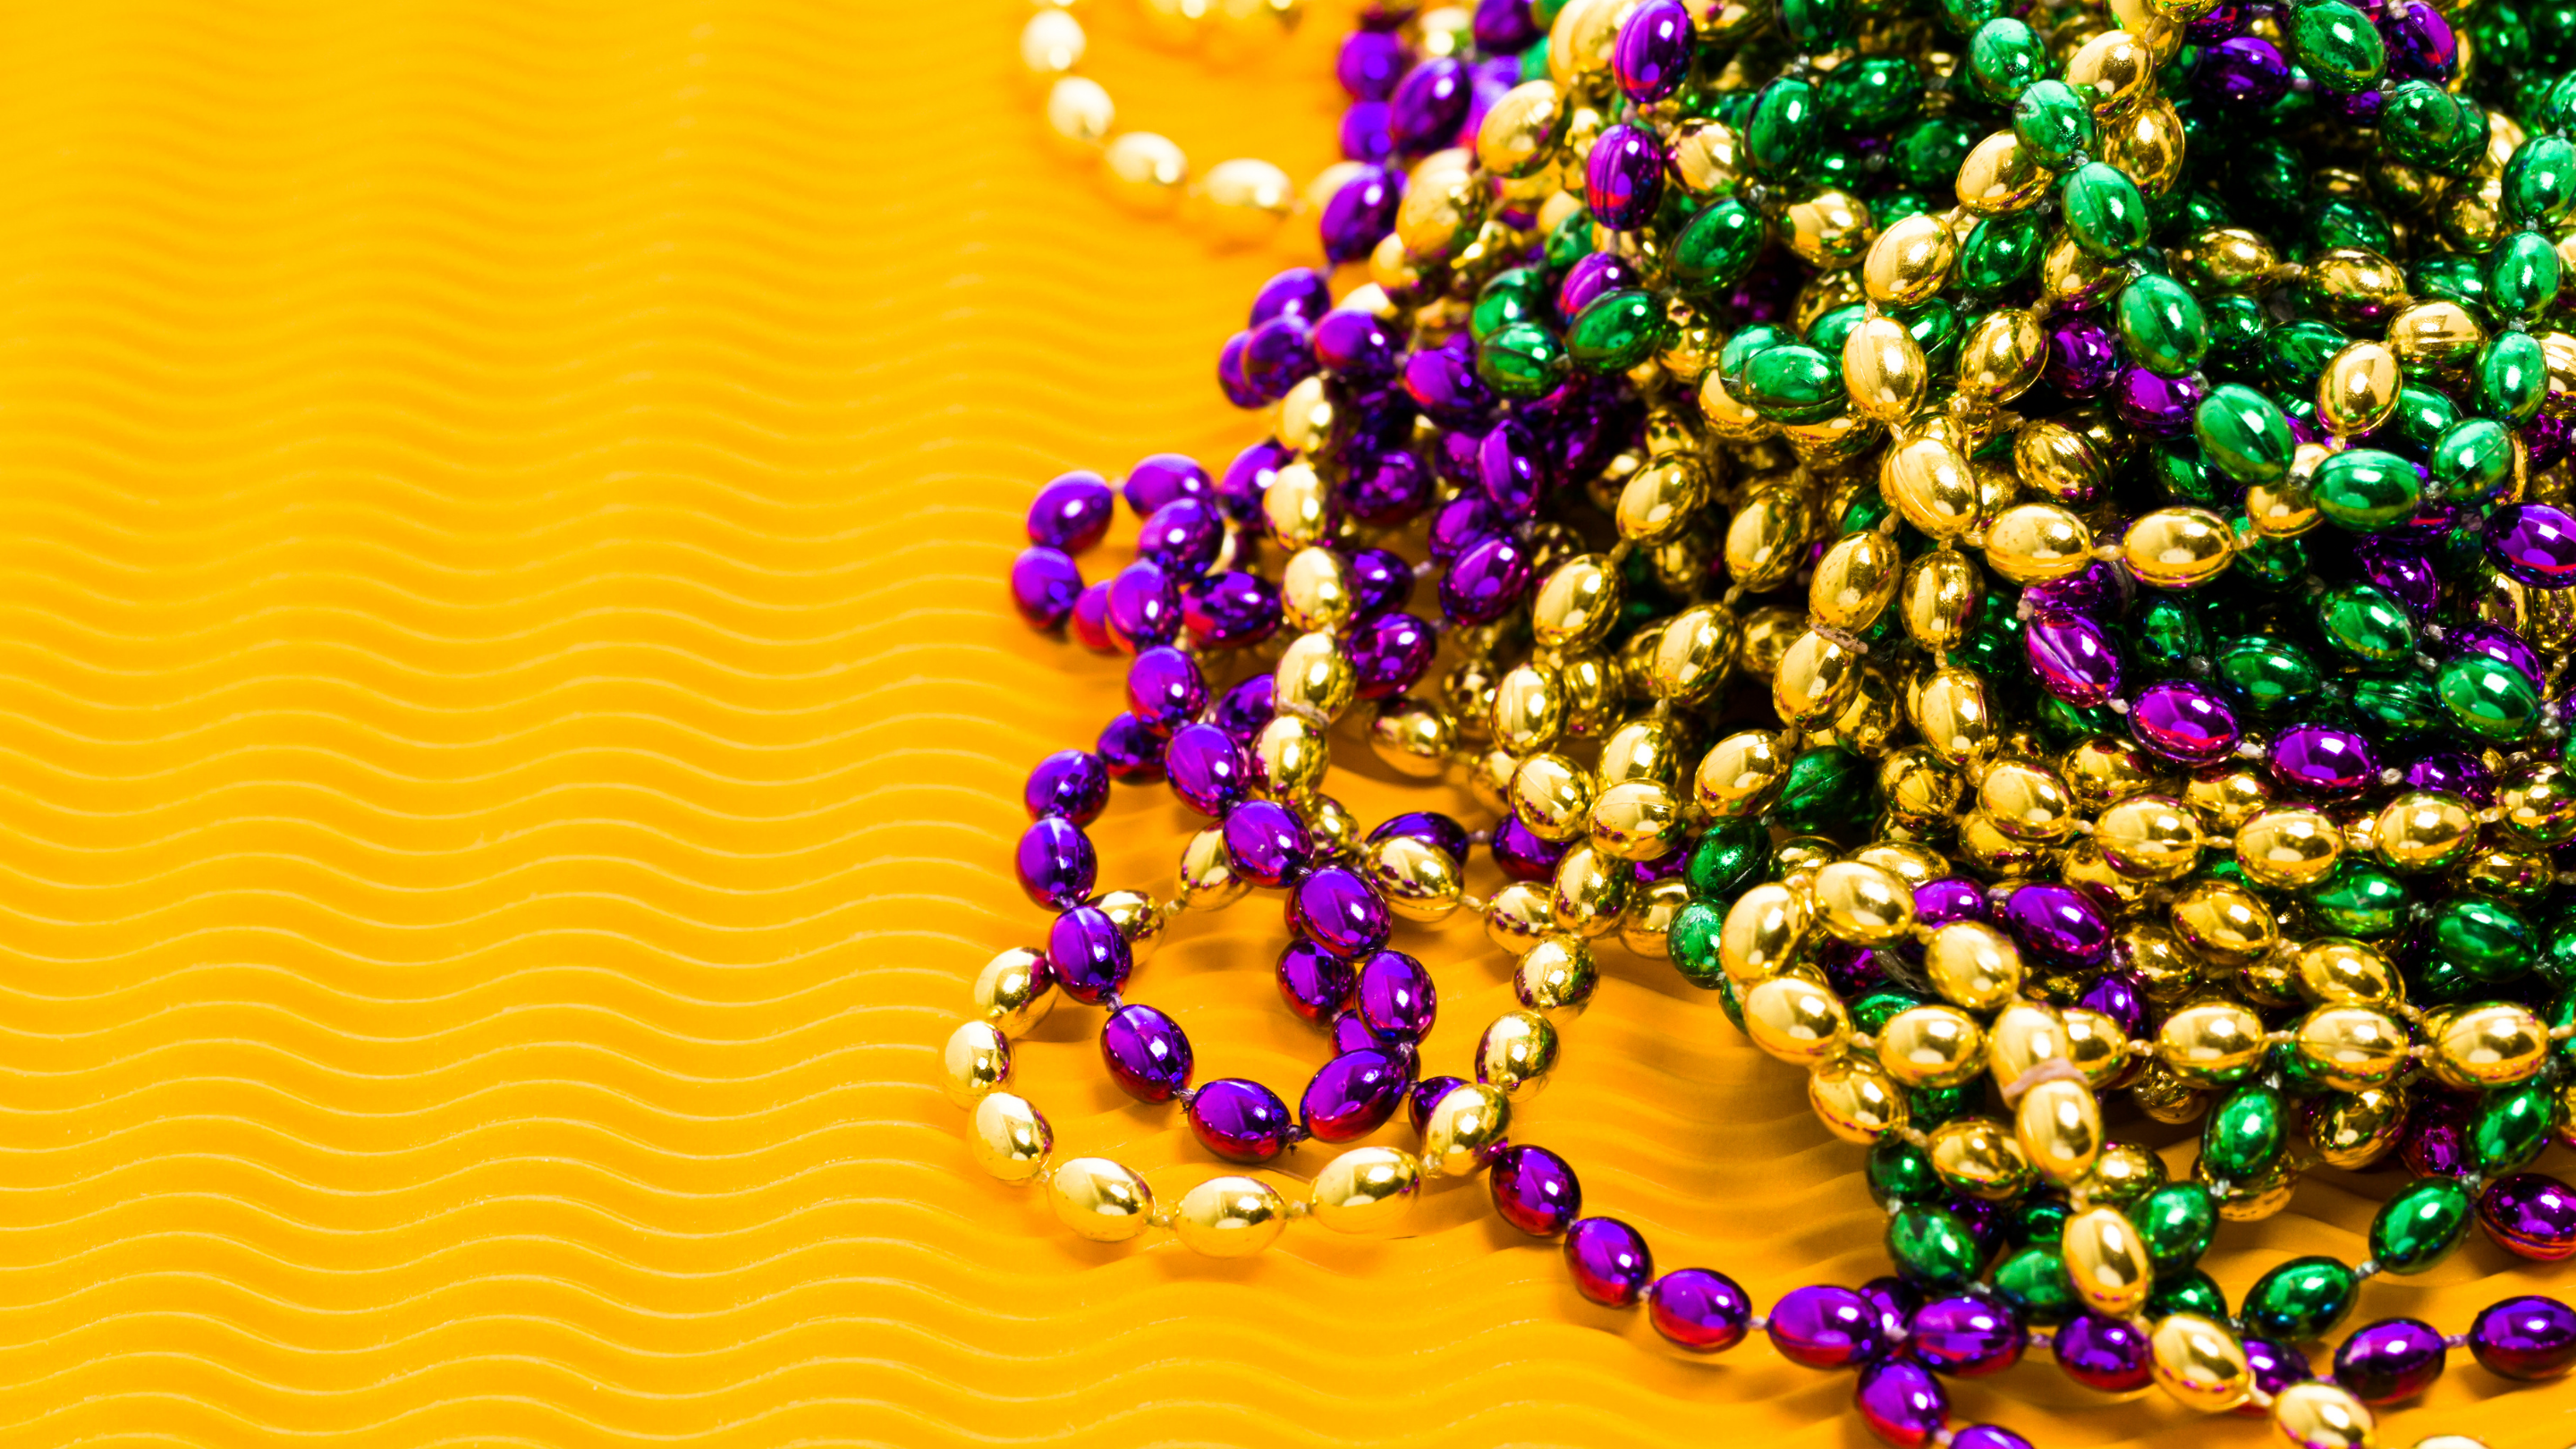 Fun Ways to Celebrate Mardi Gras and Get Ready for Lent